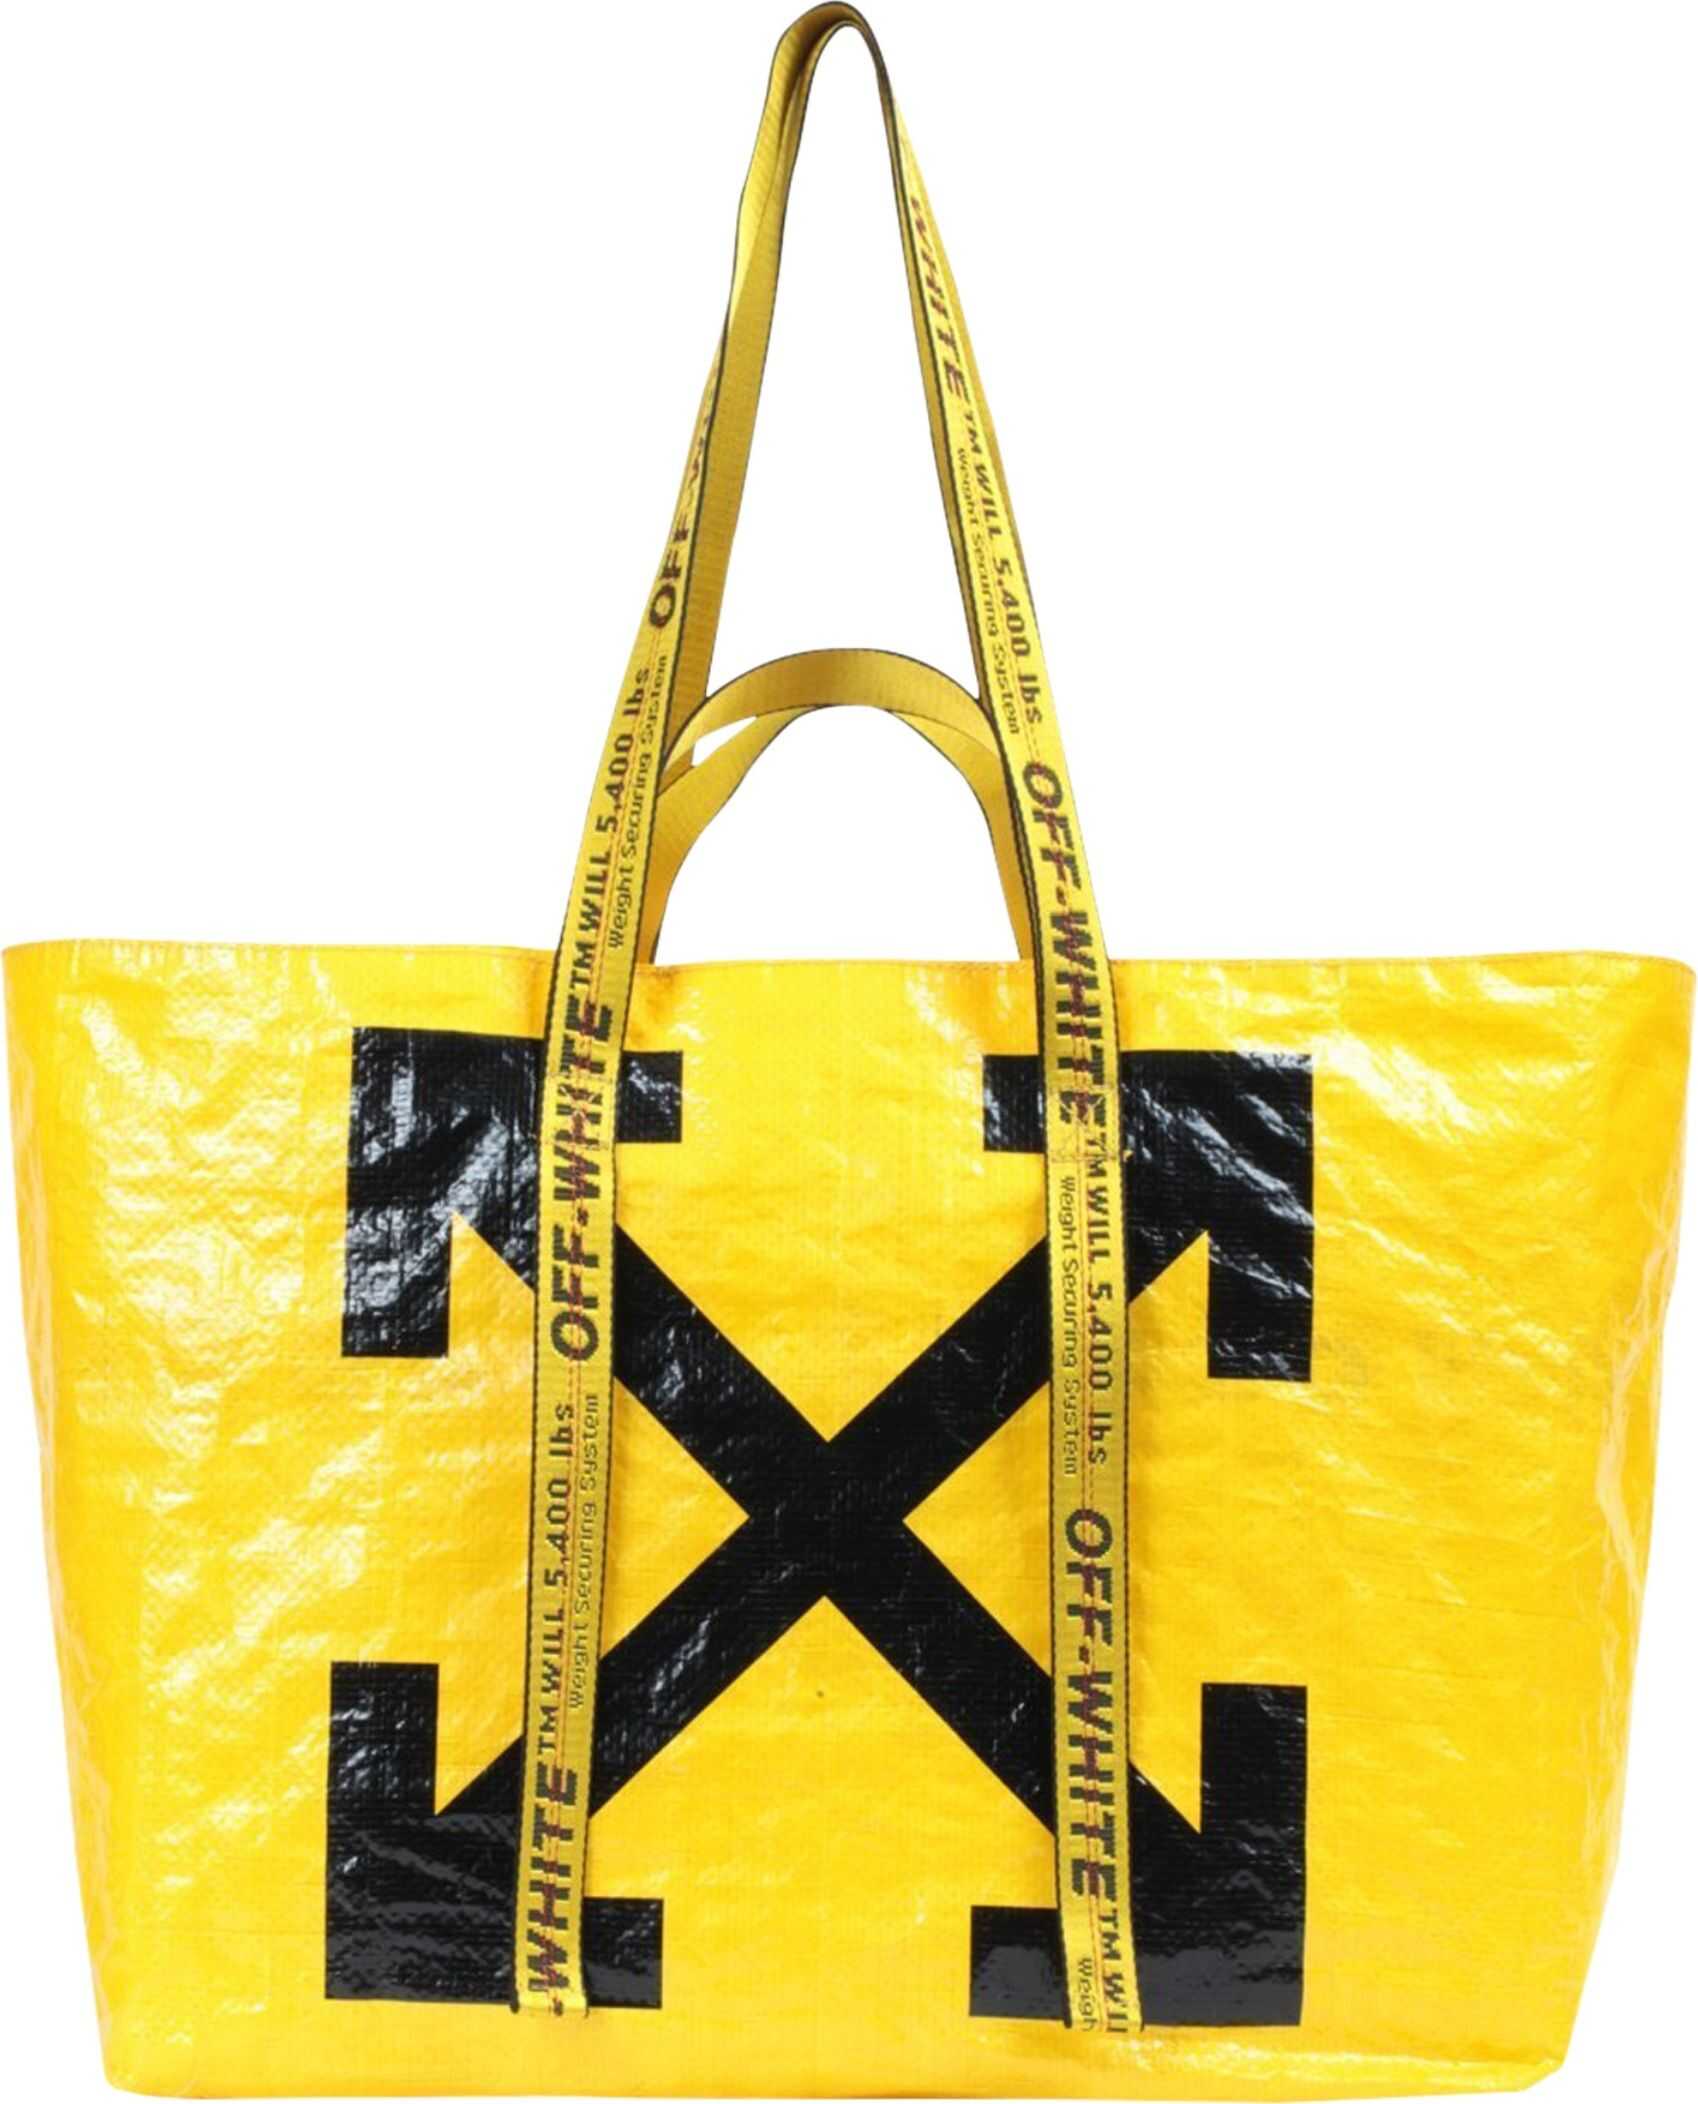 Off-White Large Tote Bag YELLOW